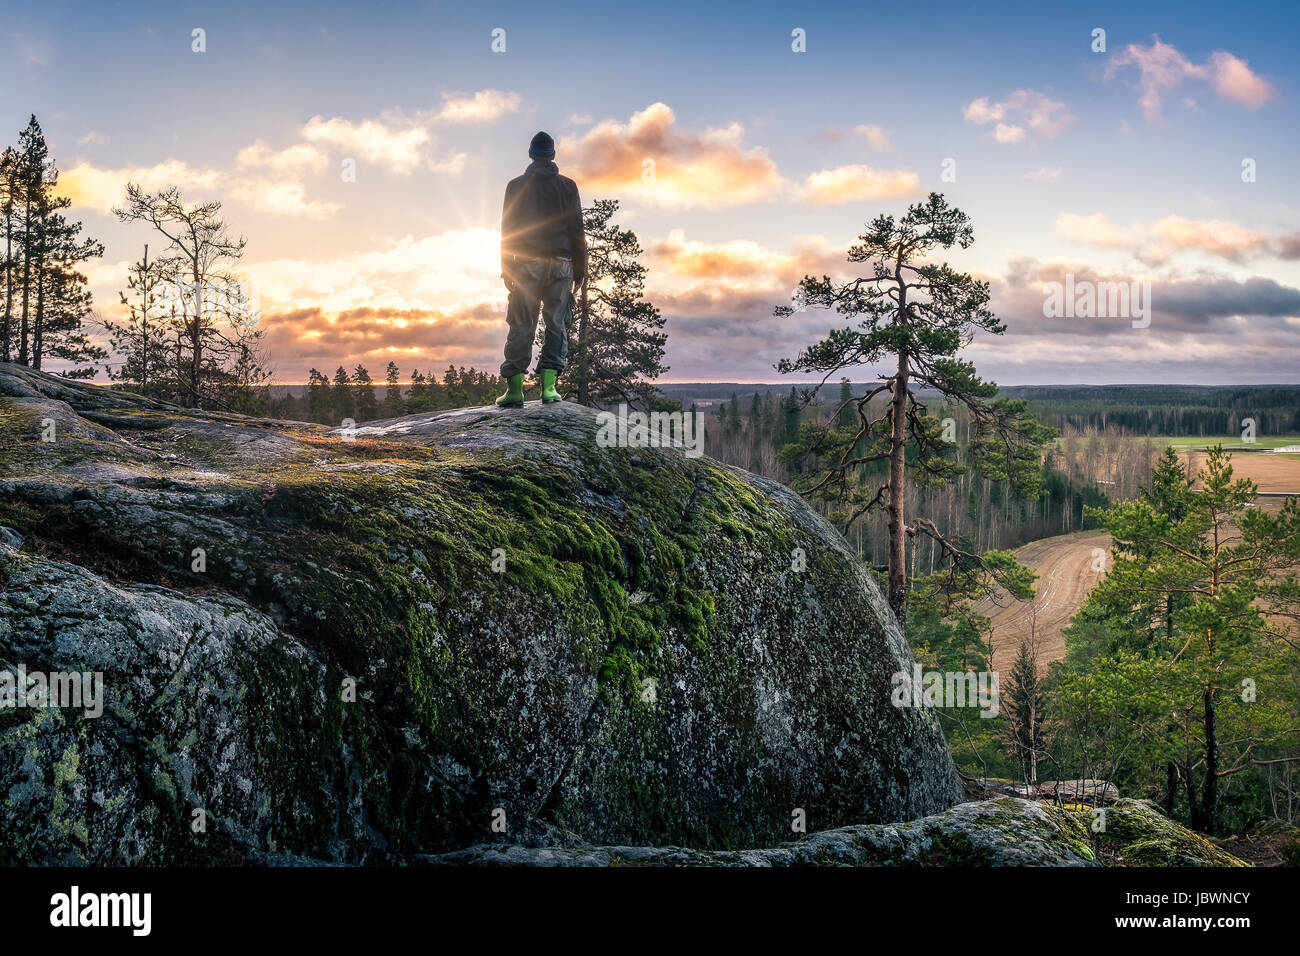 Hiker standing front of beautiful landscape at early morning Stock Photo